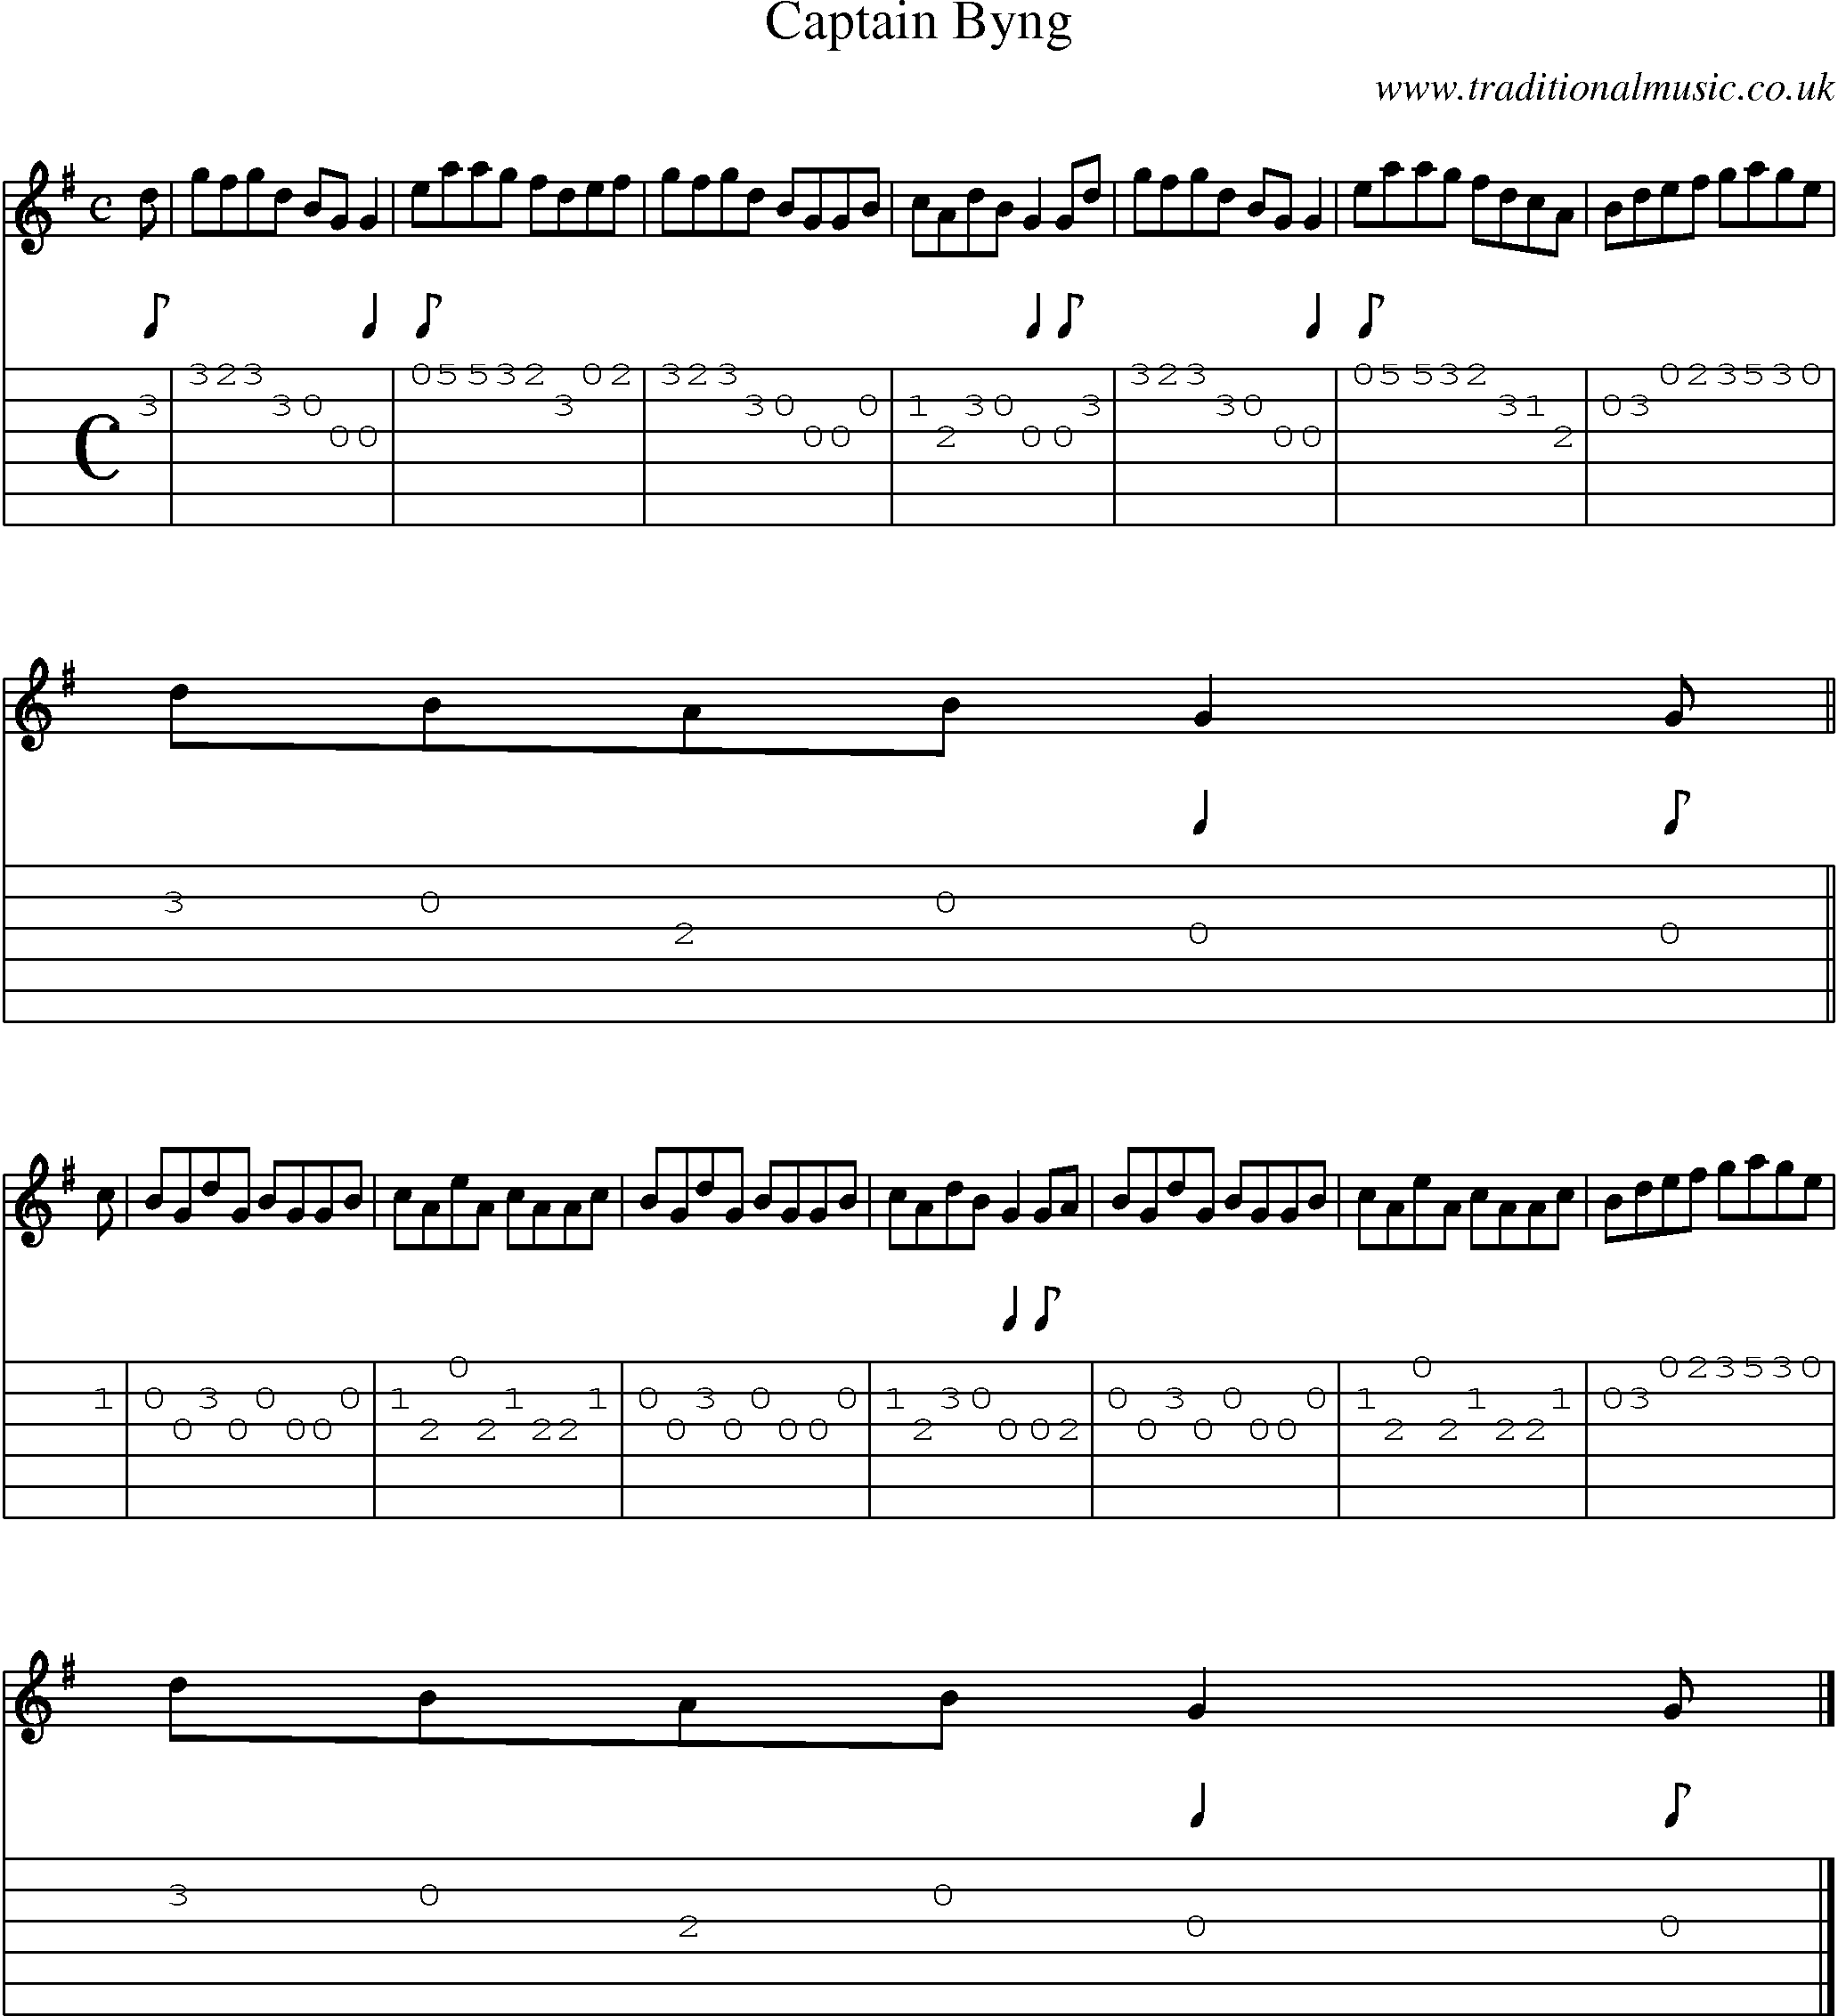 Music Score and Guitar Tabs for Captain Byng